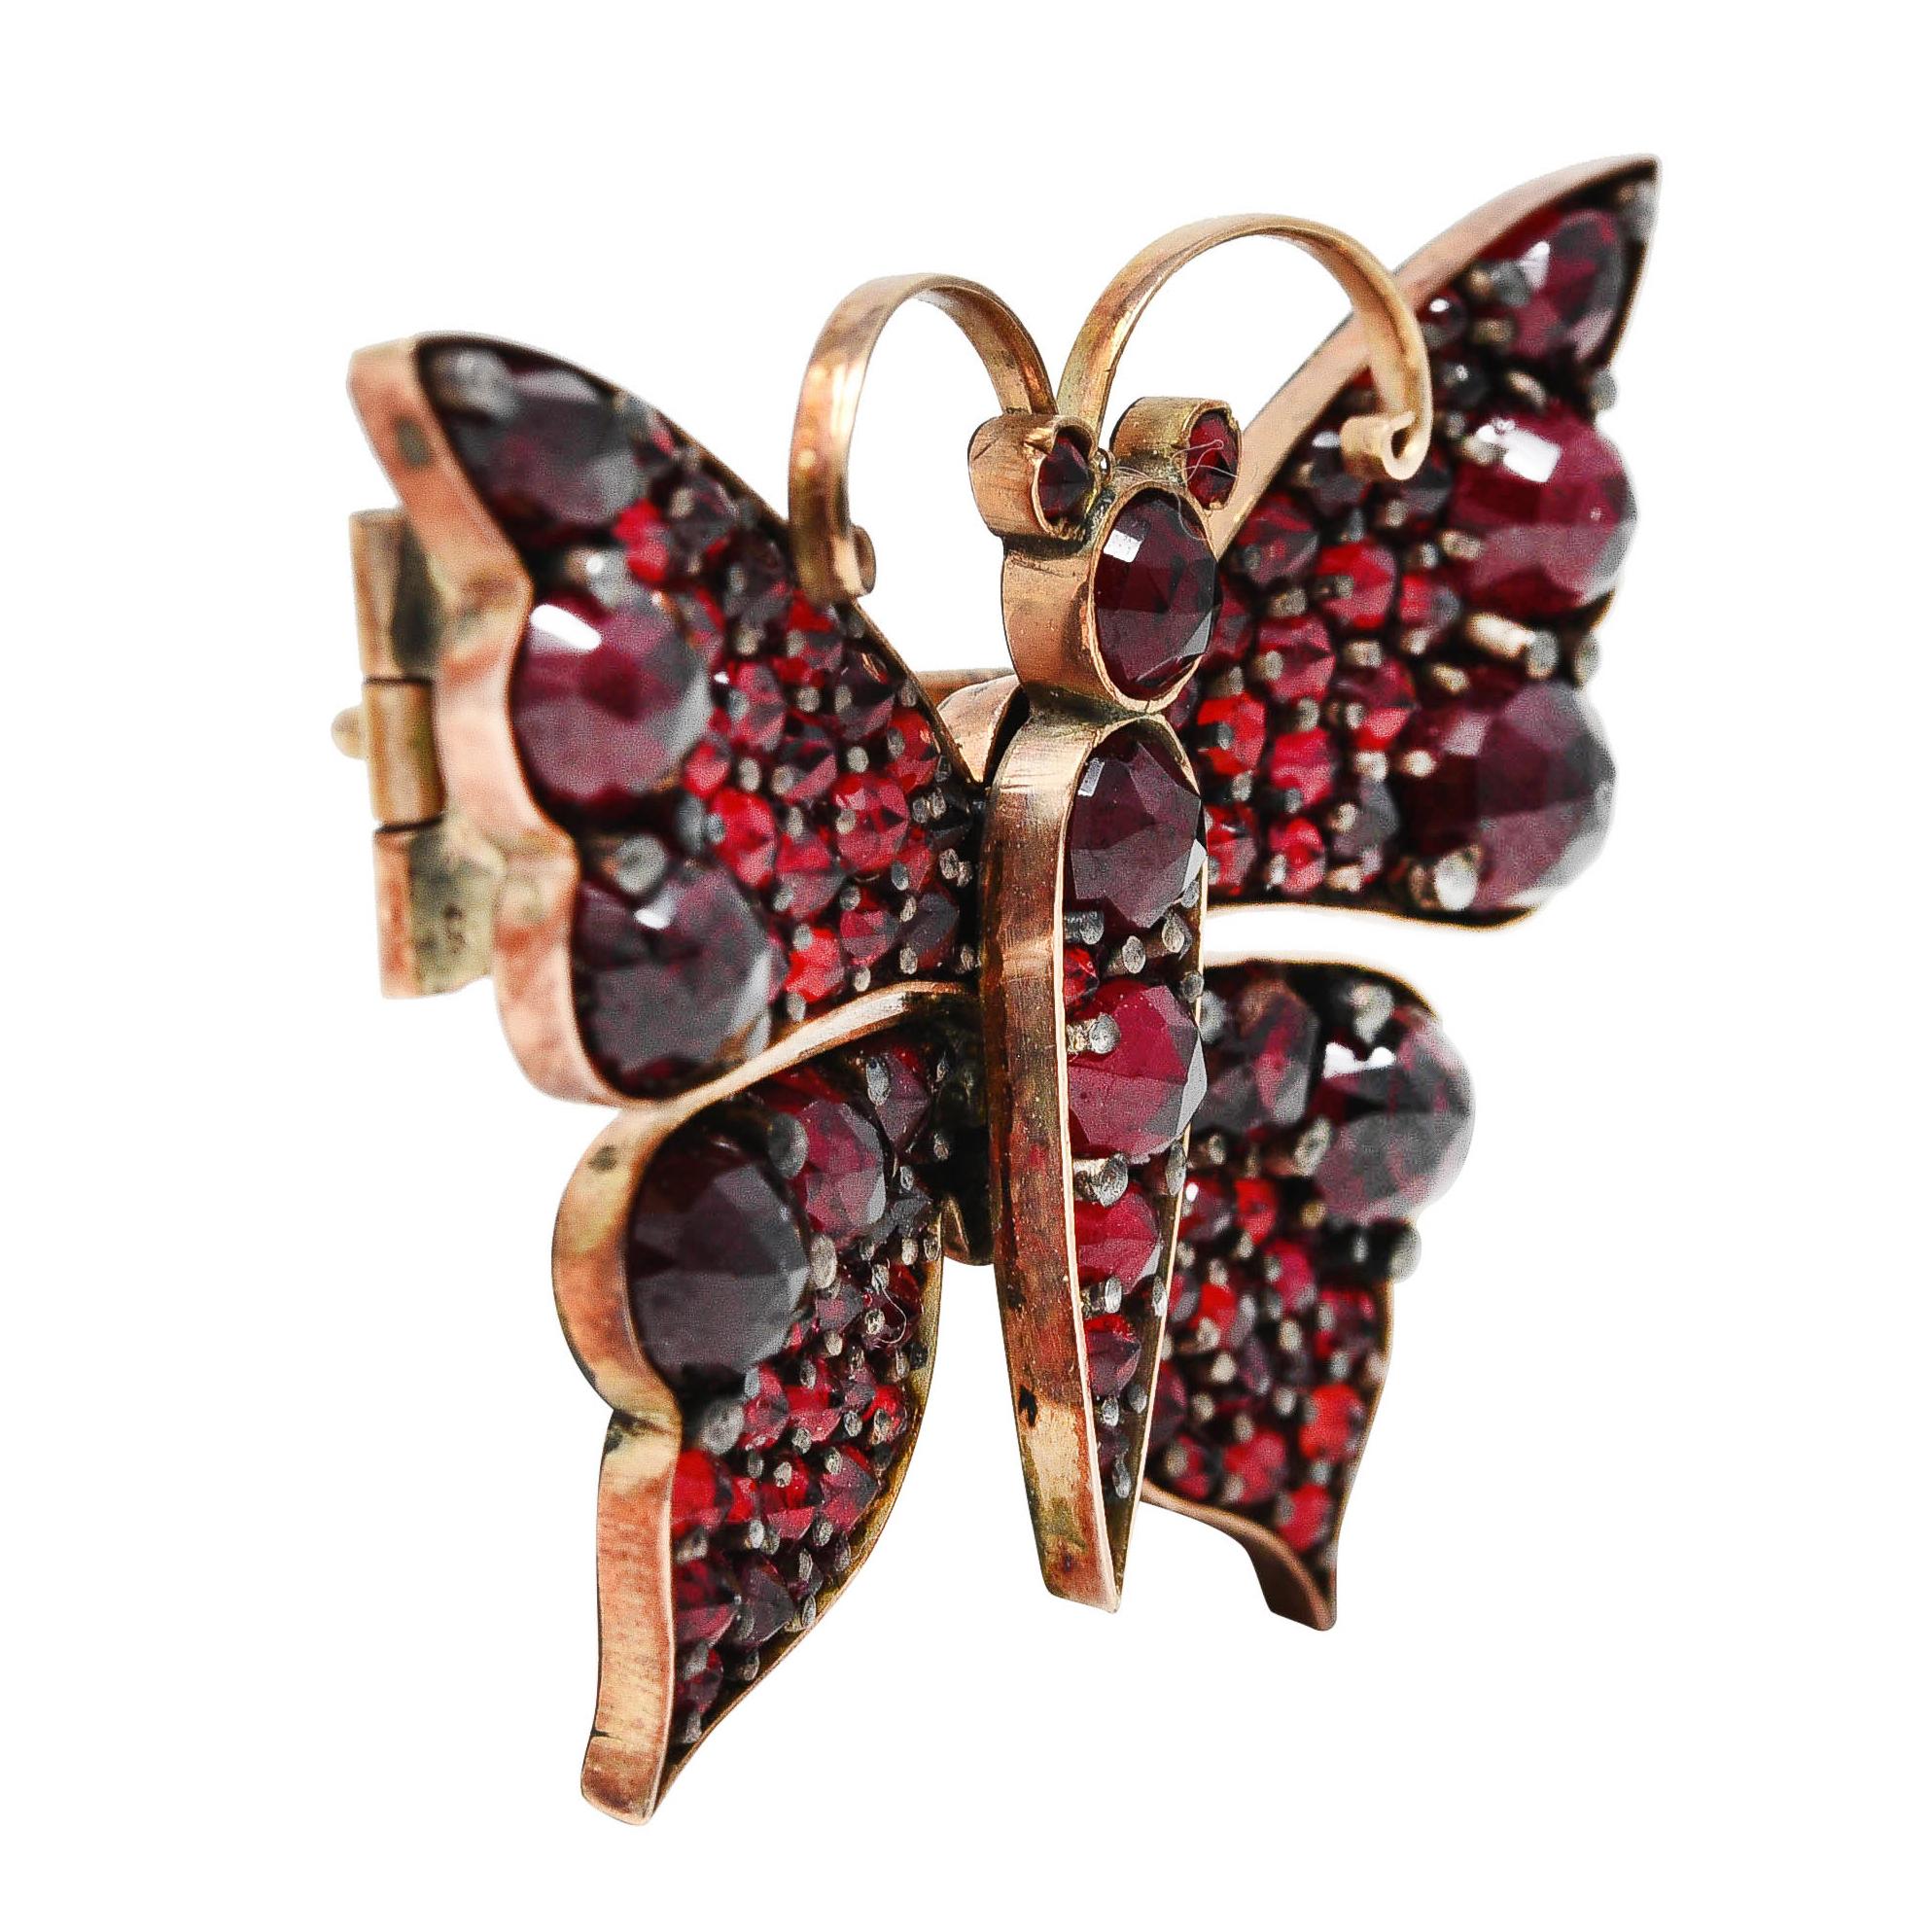 Brooch is designed as a stylized butterfly topped by scrolled wire antennae. With faceted Bohemian garnets throughout - bead set by silver. Measuring from 4.0 mm to 1.5 mm. Very well matched in medium dark red color. Completed by a pin stem with